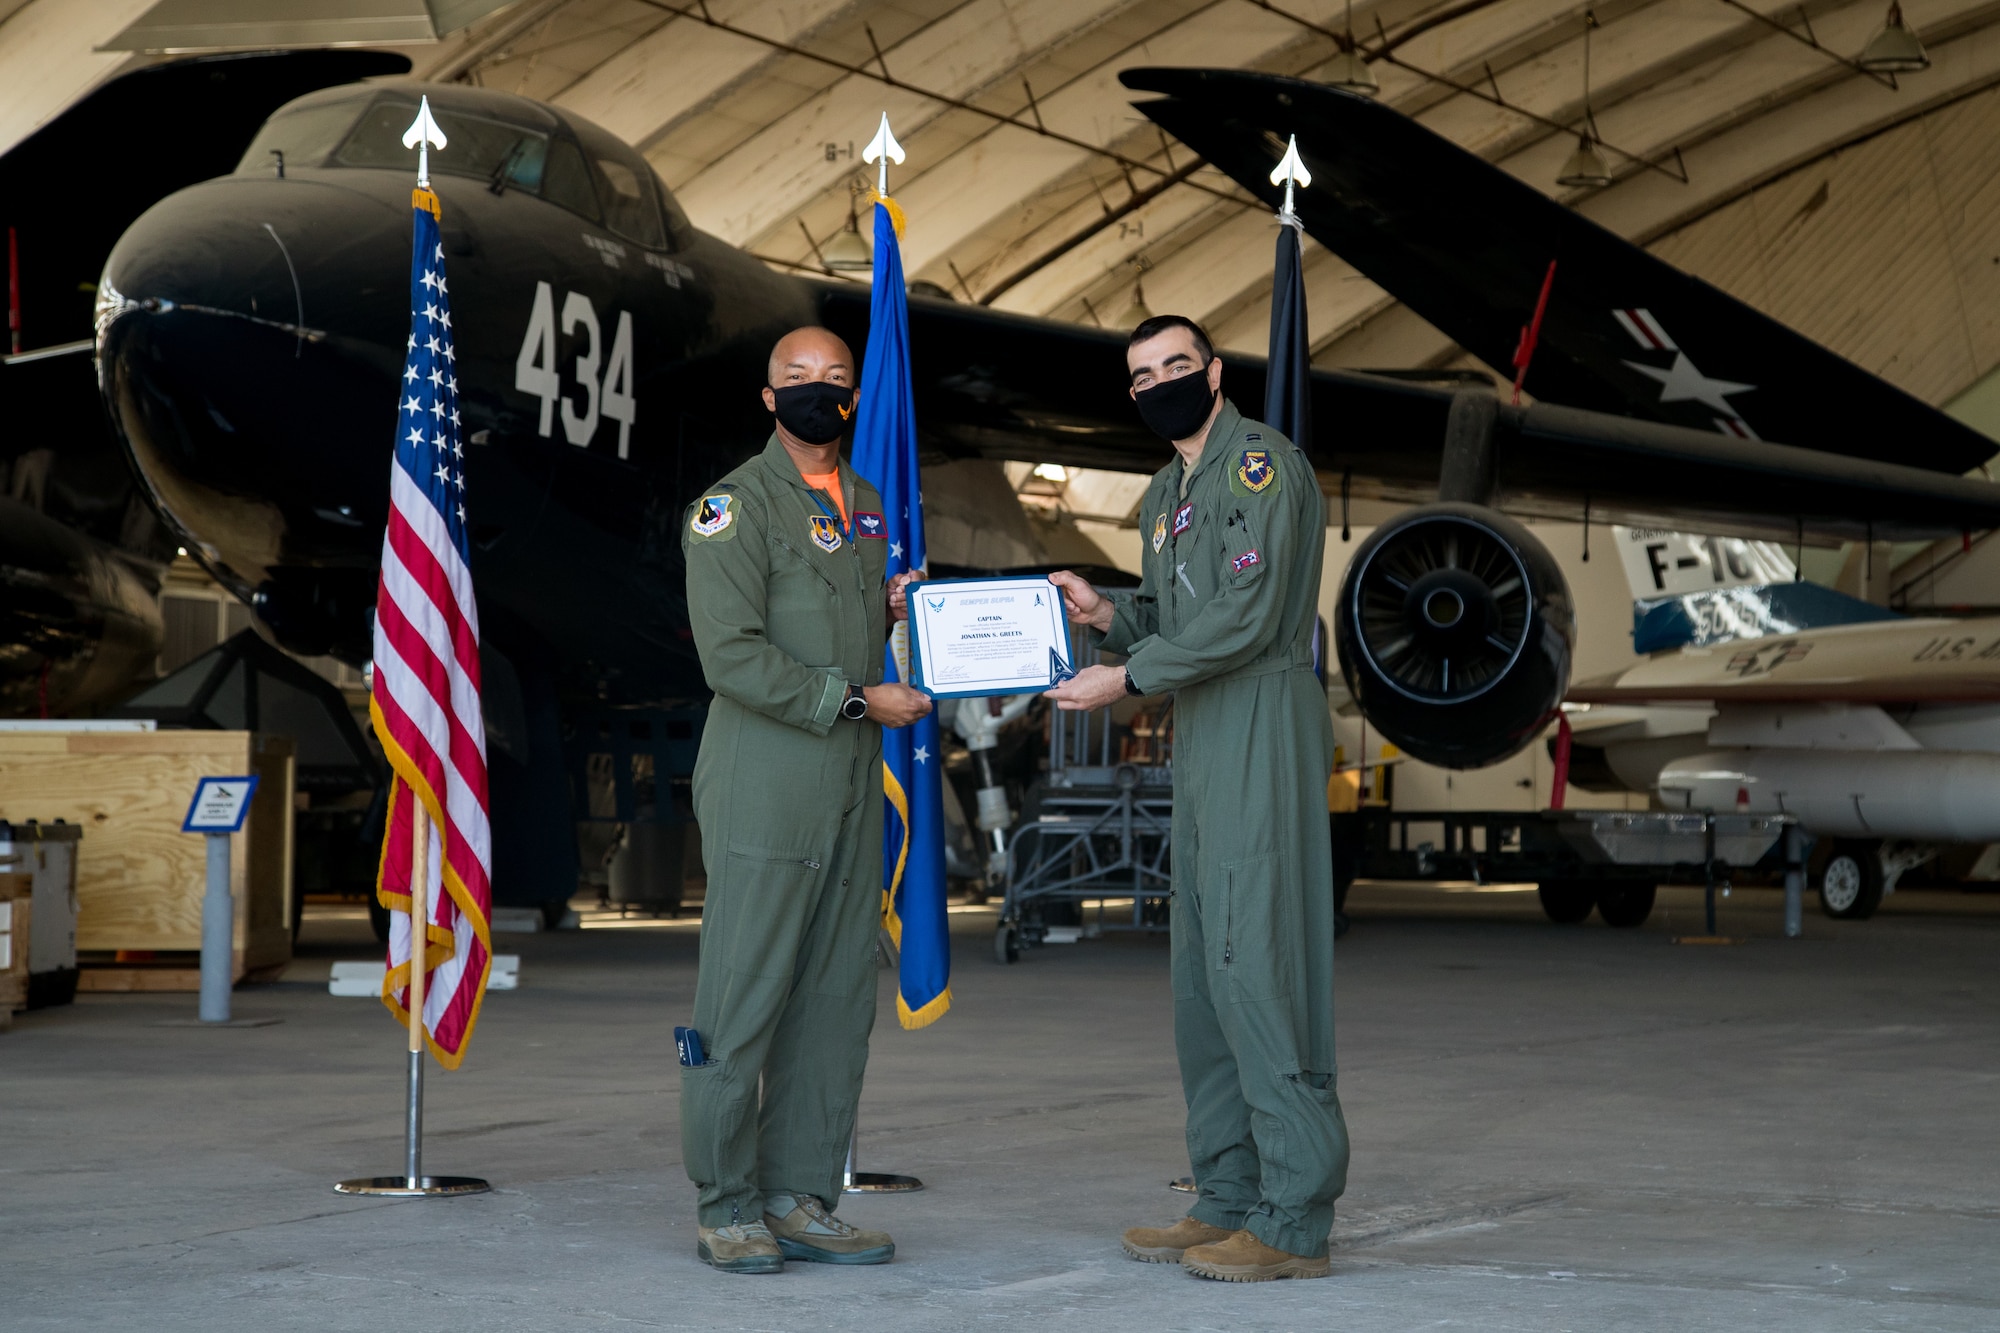 Capt. Jonathan Geerts, 419th Flight Test Squadron, originally of Berwyn, Pennsylvania, accepts his U.S. Space Force certificate from Col. Randel Gordon, 412th Test Wing Vice Commander during a Space Force Transfer Ceremony at Edwards Air Force Base, California, Feb. 11. (Air Force photo by Richard Gonzales)